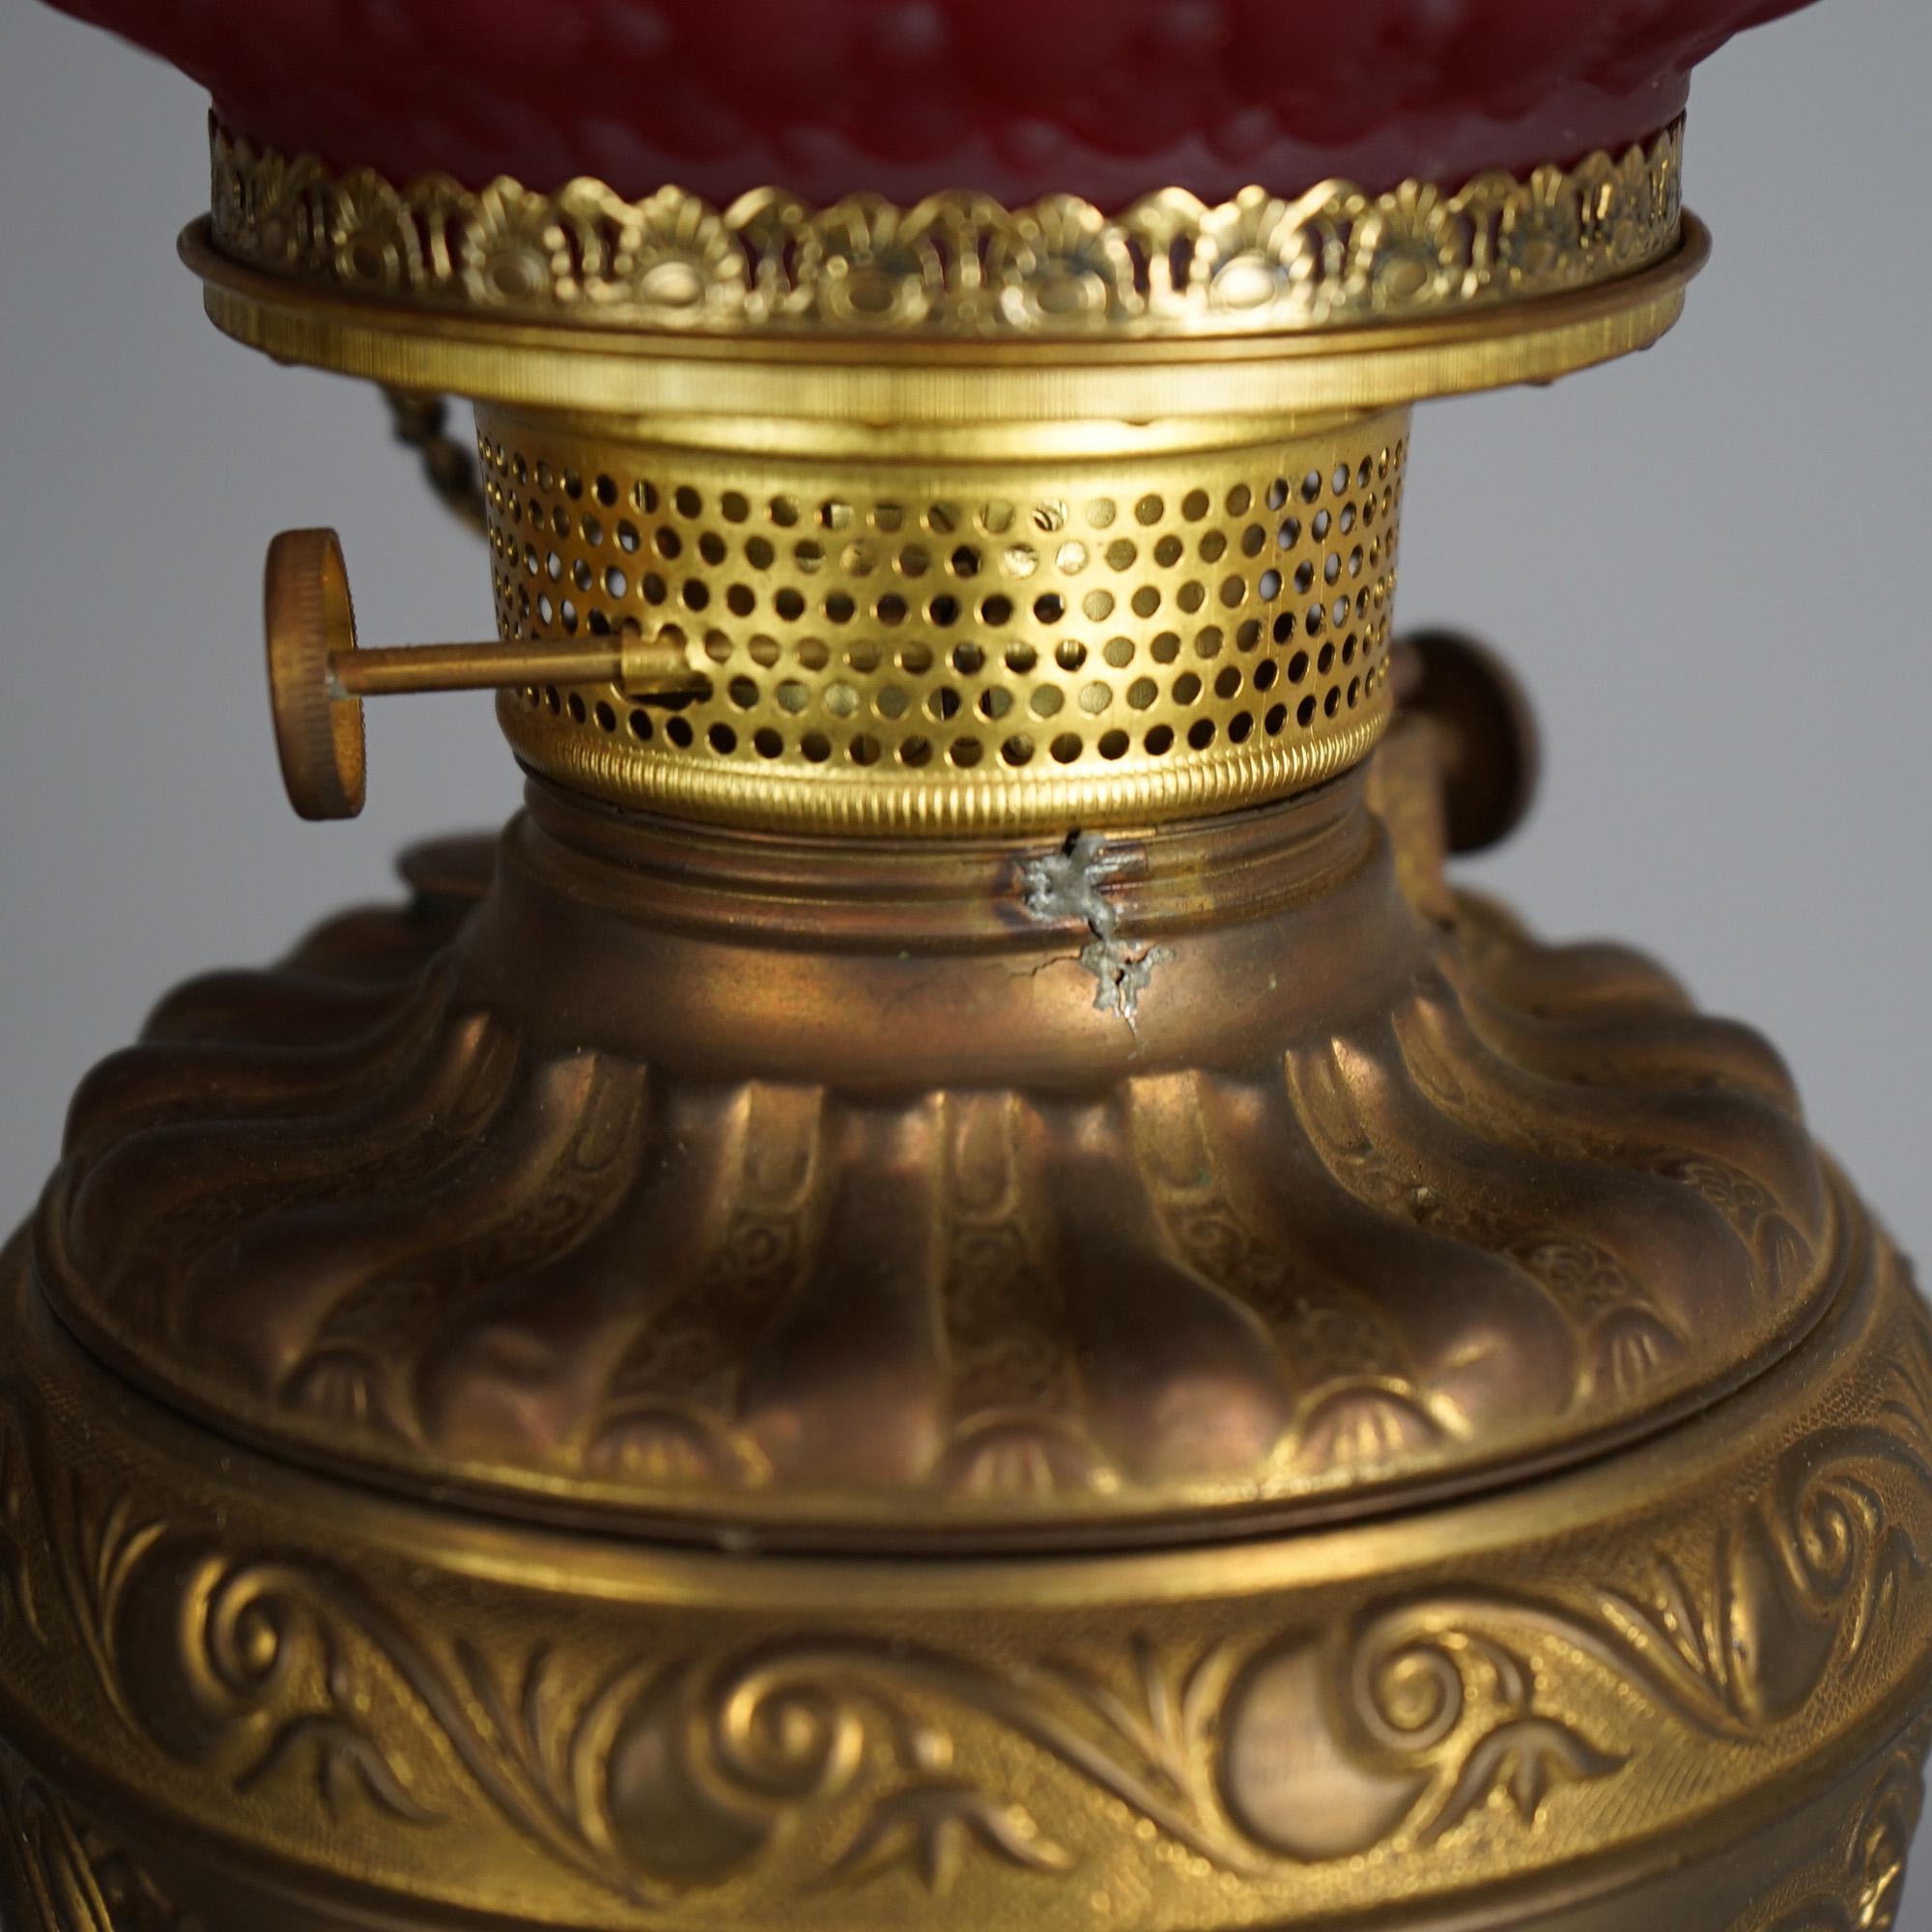 Antique Figural Gilt Metal Parlor Lamp with Quilted Red Glass Shade Circa 1900 In Good Condition For Sale In Big Flats, NY